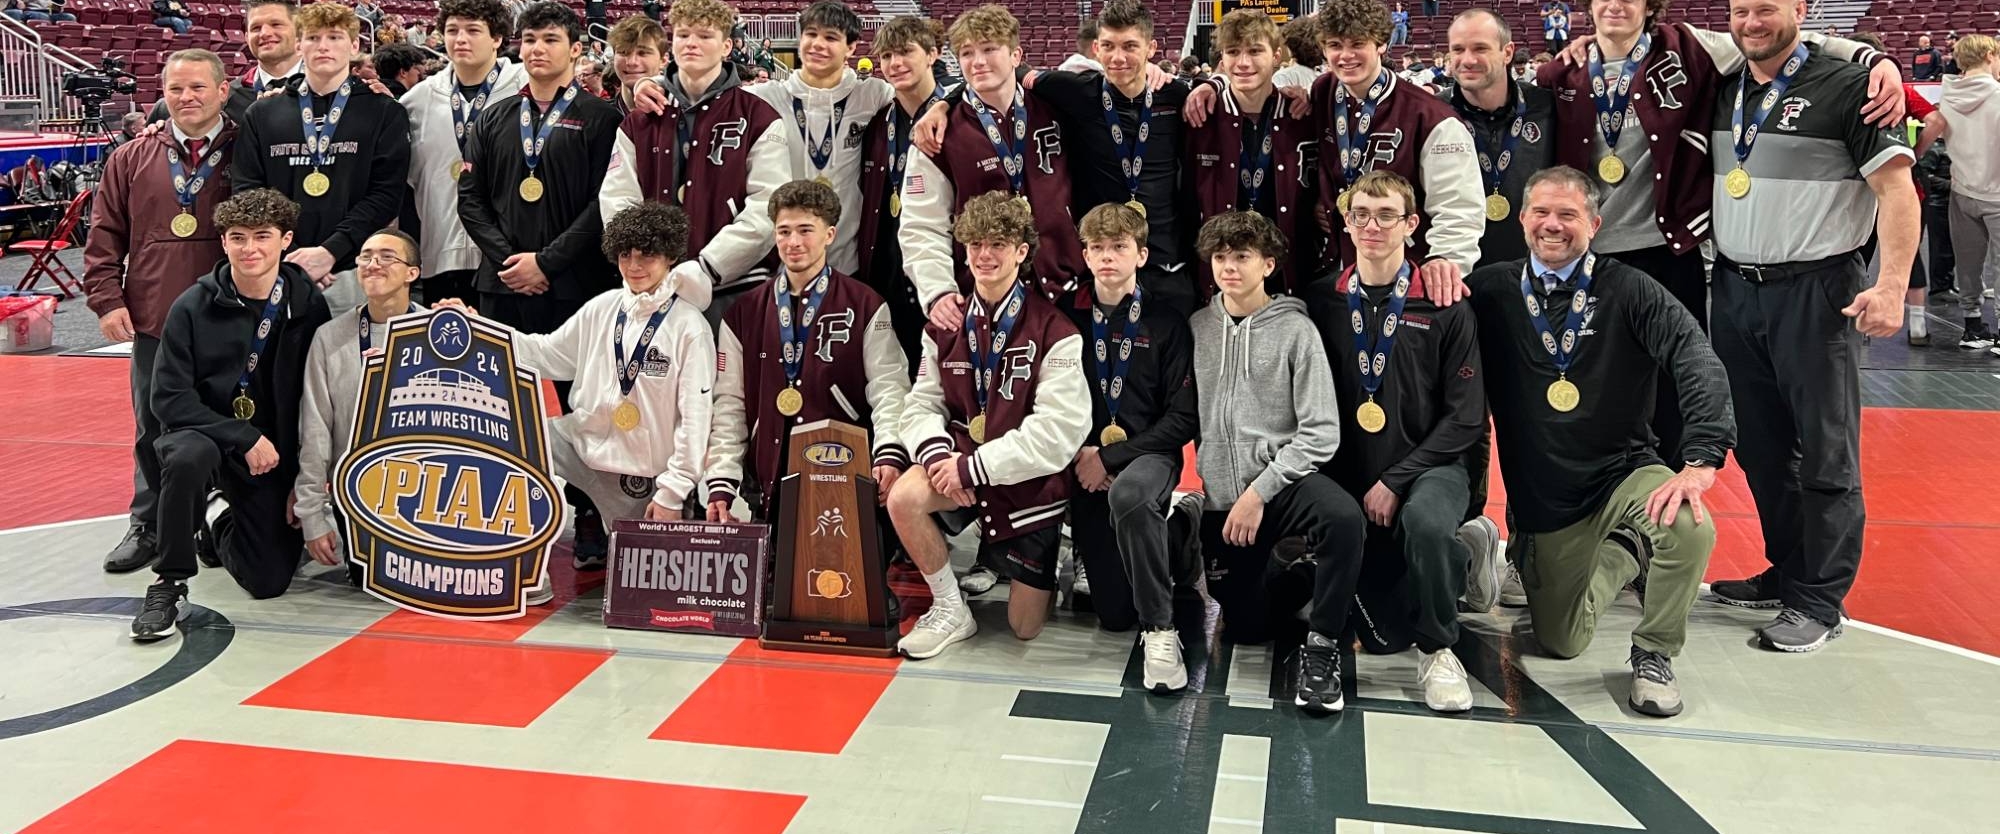 Congrats to our PIAA 2A Wrestling 2x State Champs! - Content Image for demo40445_bigteams_com